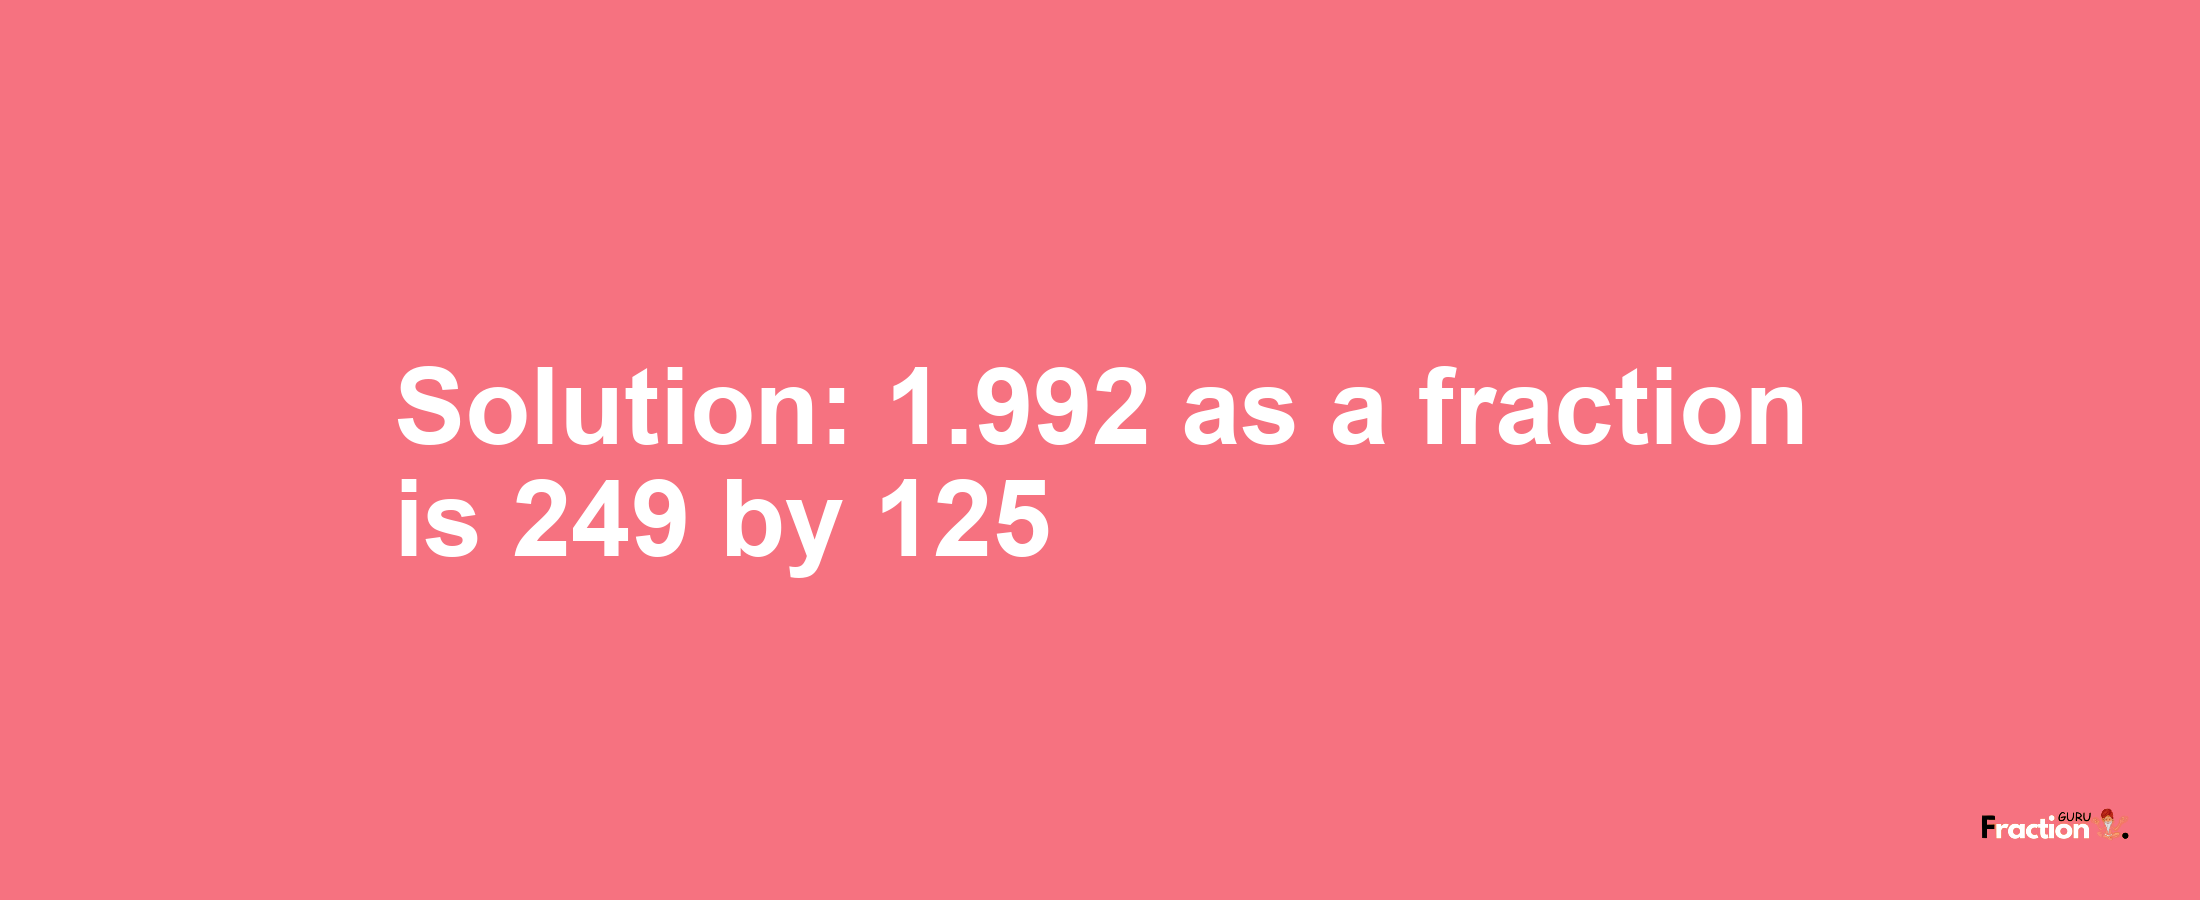 Solution:1.992 as a fraction is 249/125